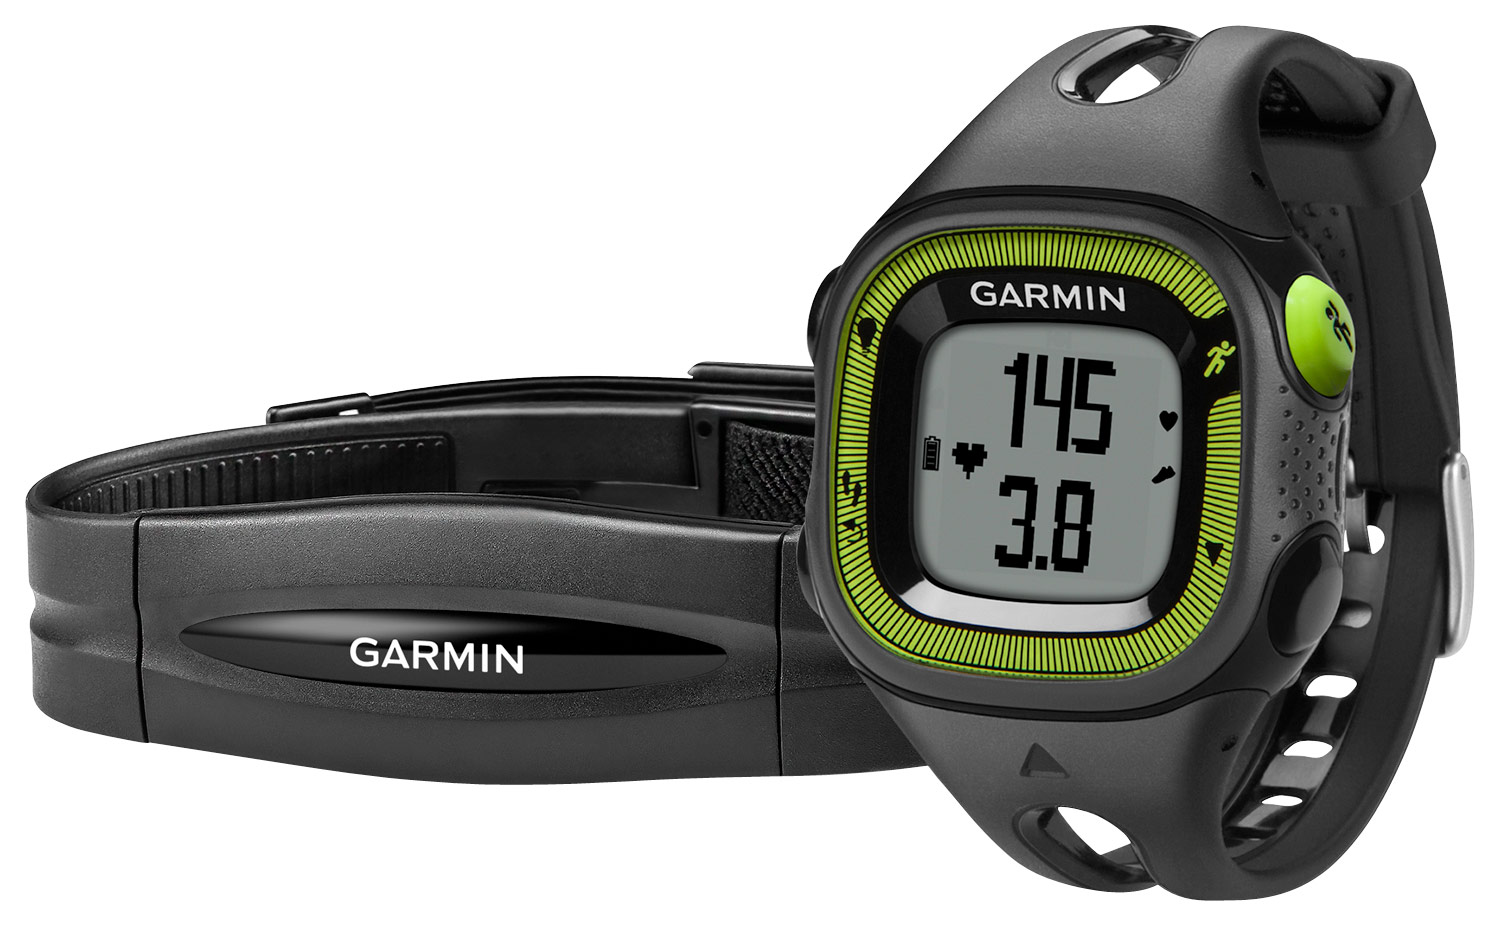 Questions And Answers: Garmin Forerunner 15 Gps Watch (small) Black 